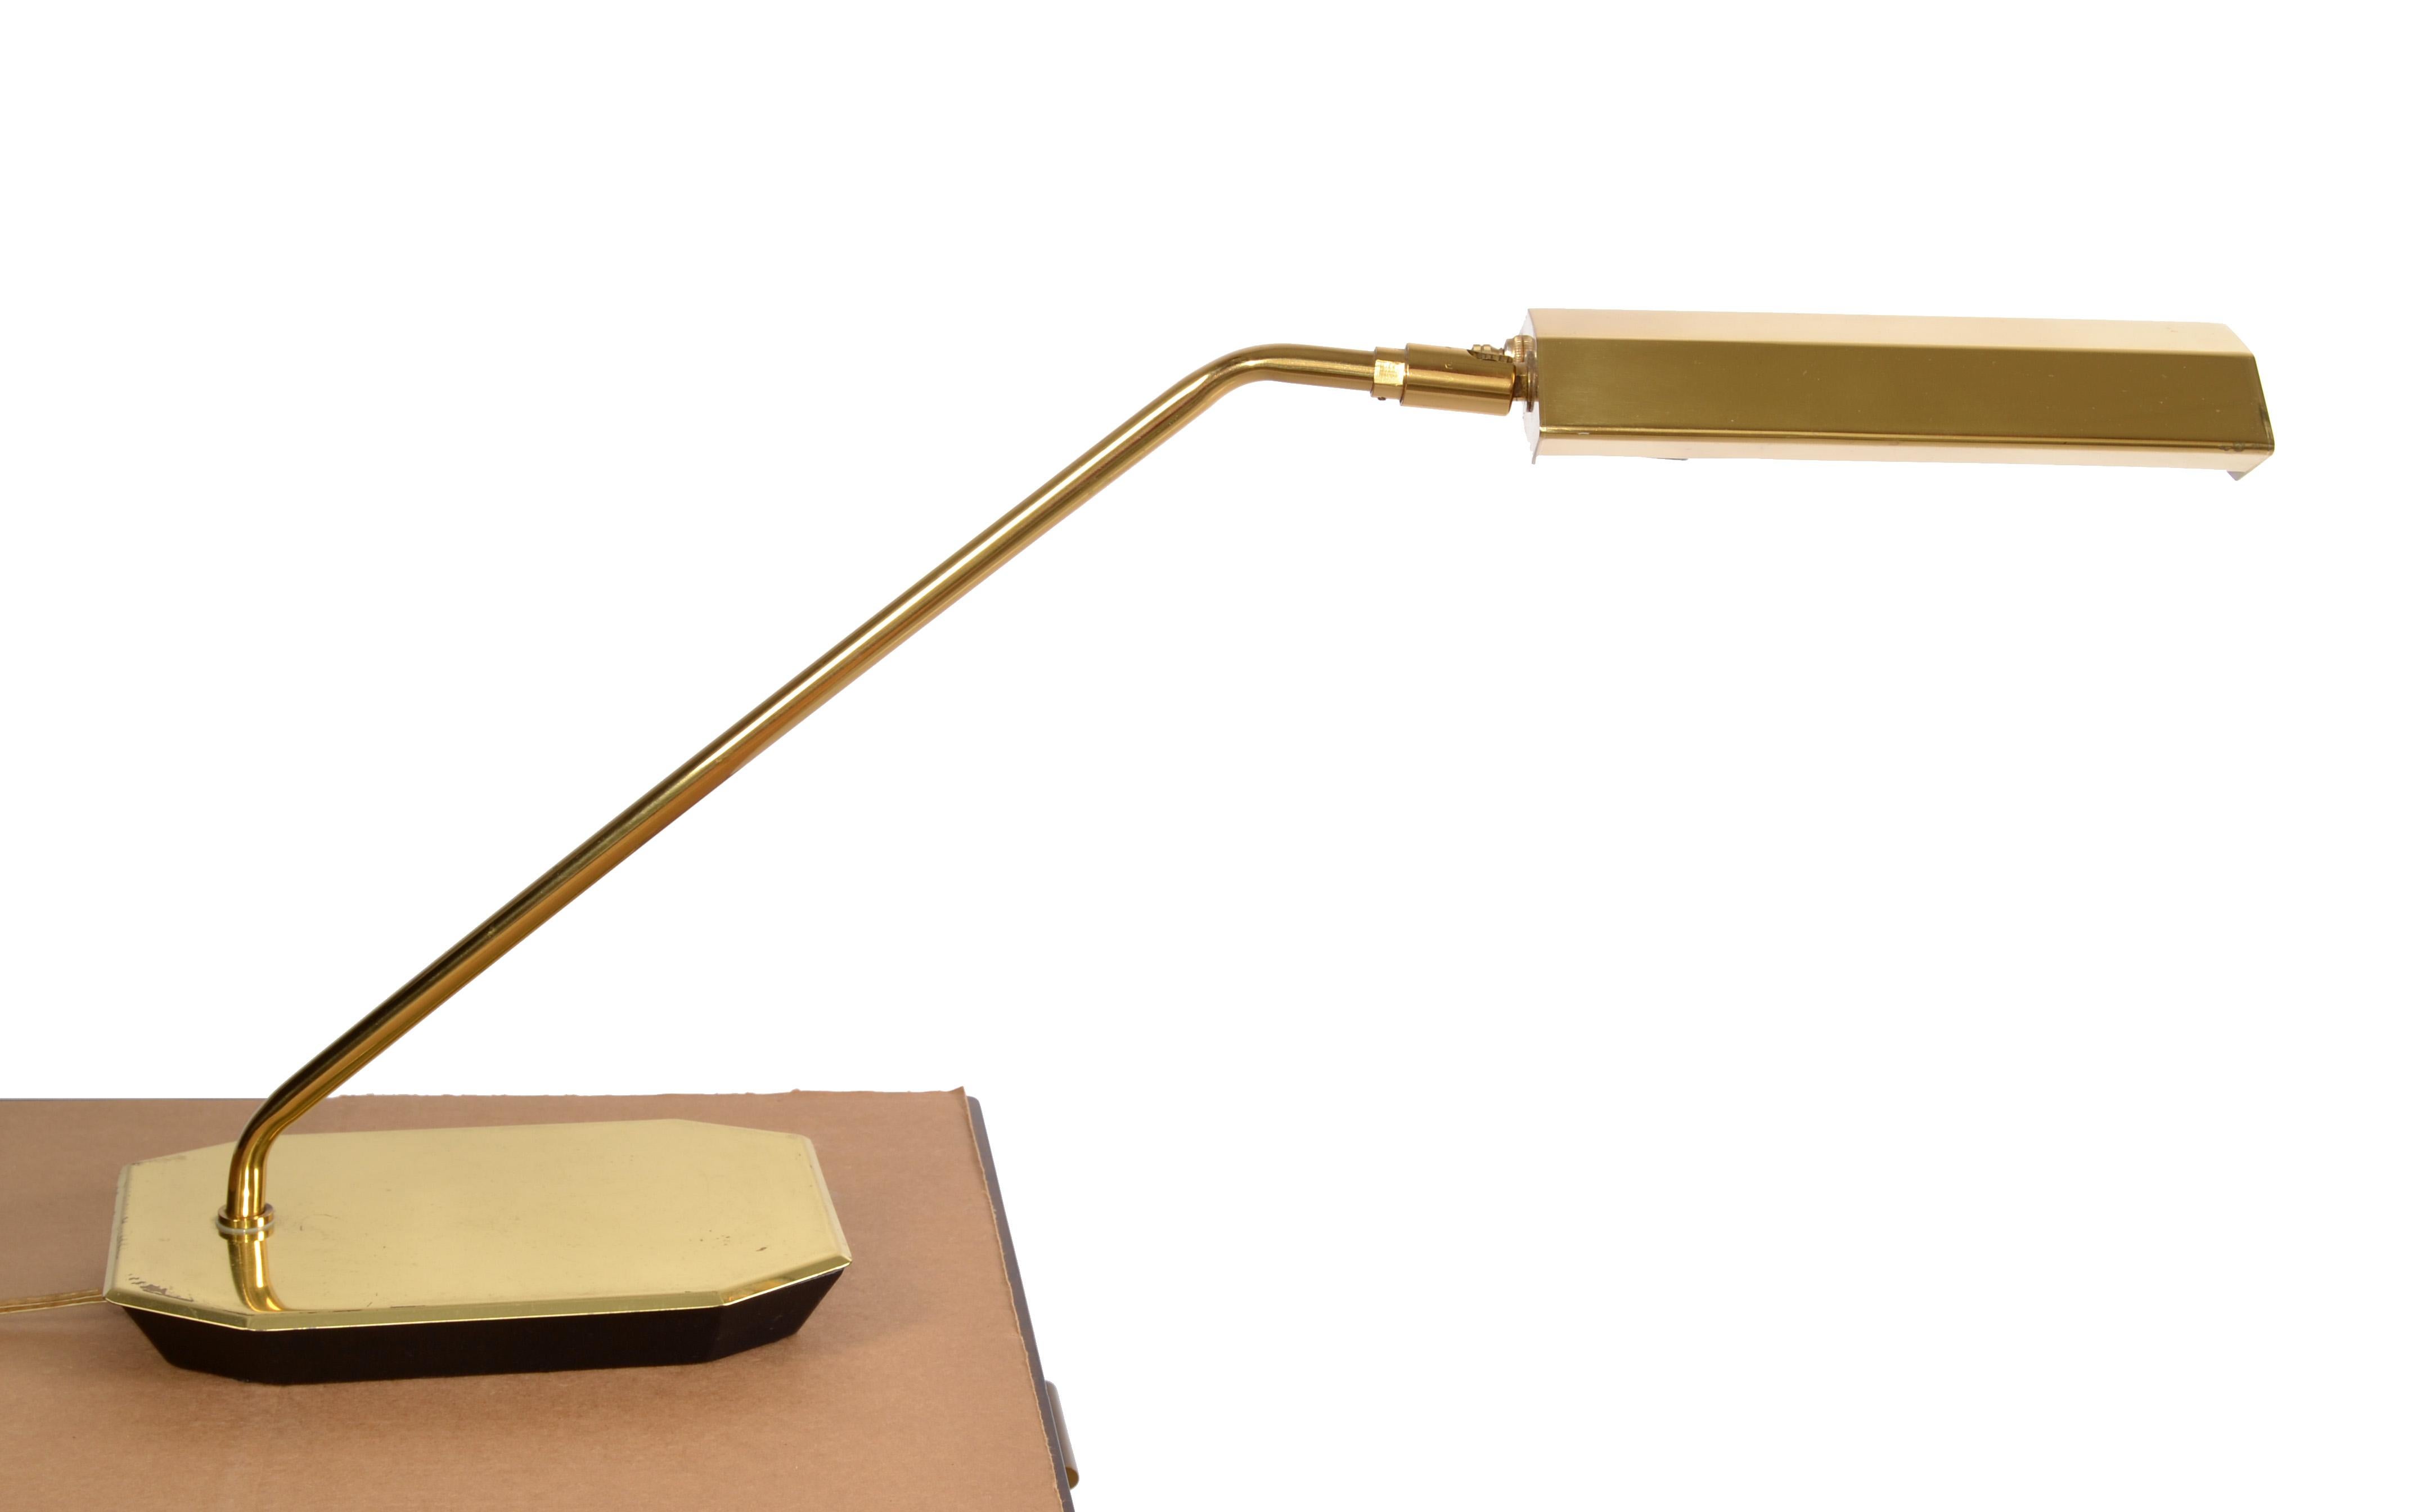 This Swing Brass Desk Lamp was made by Koch & Lowy the esteemed American Company that designed all forms of lighting, from table to floor lamps, and chandeliers.  
It is best known and recognized by these floor lamps, that came in varying degrees of